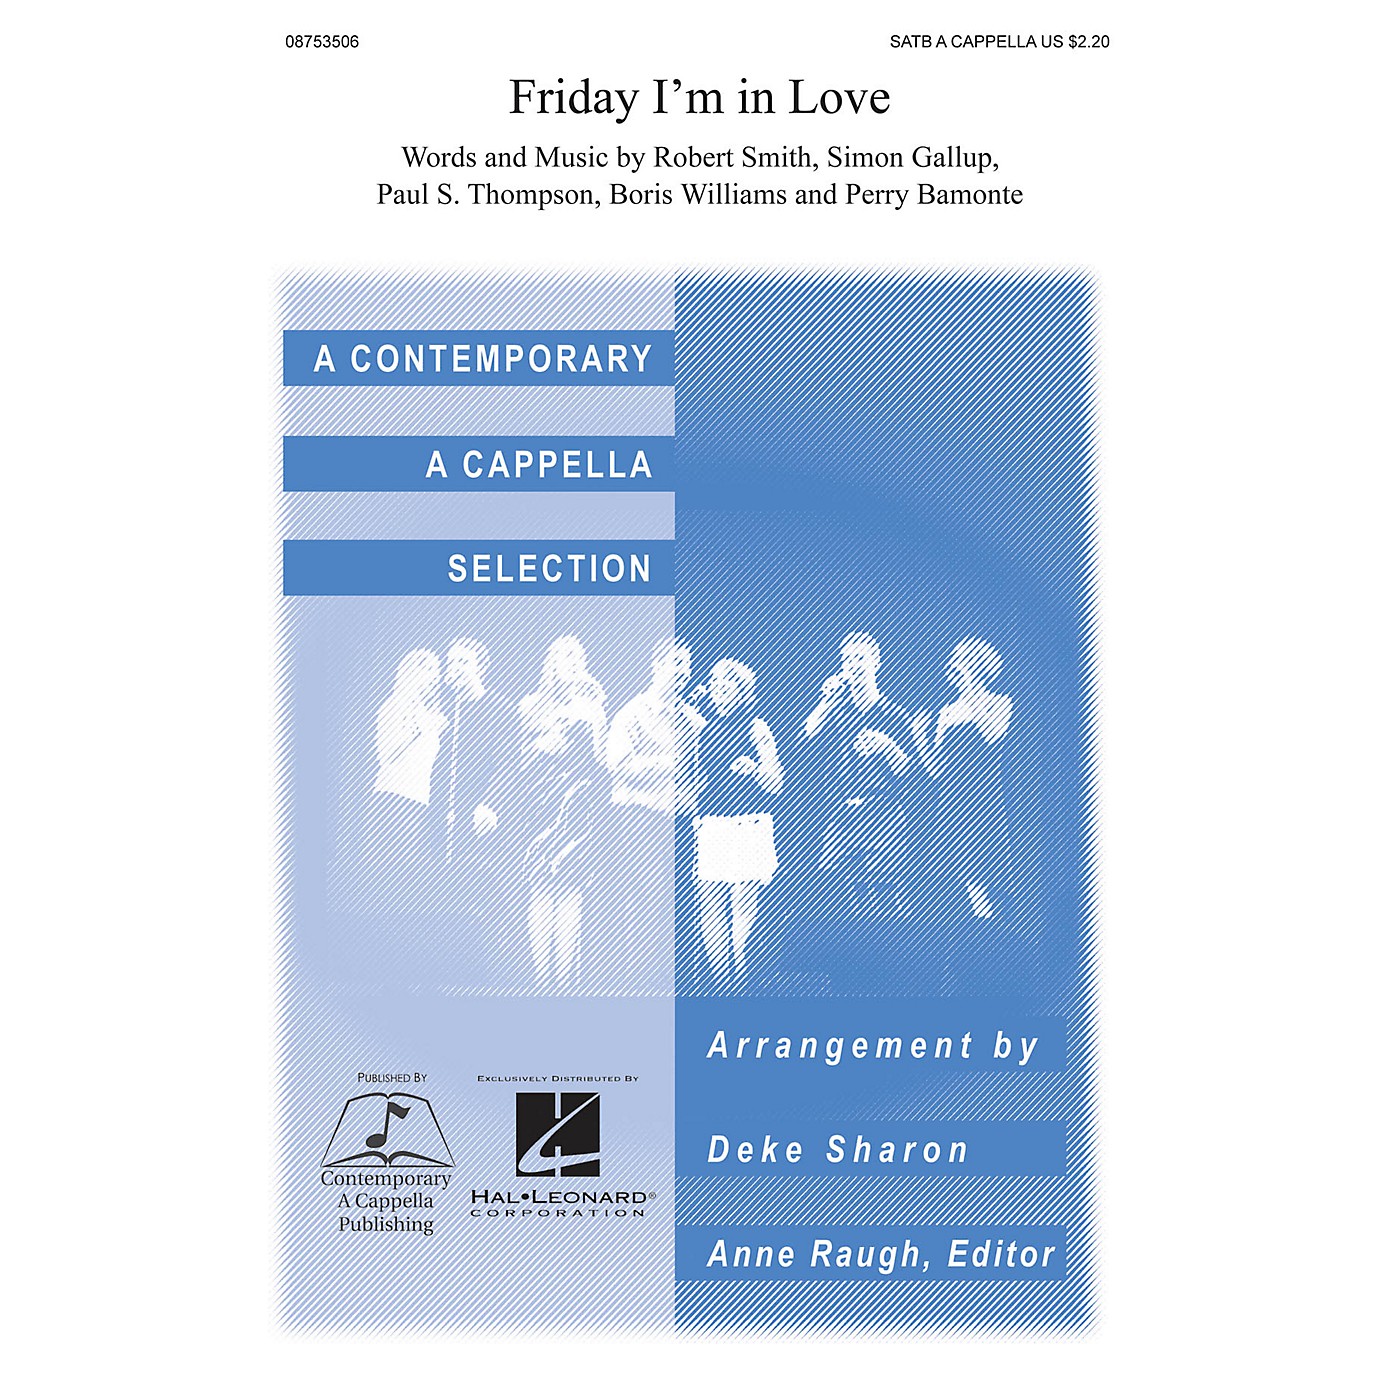 Contemporary A Cappella Publishing Friday I'm in Love SATB a cappella arranged by Deke Sharon thumbnail